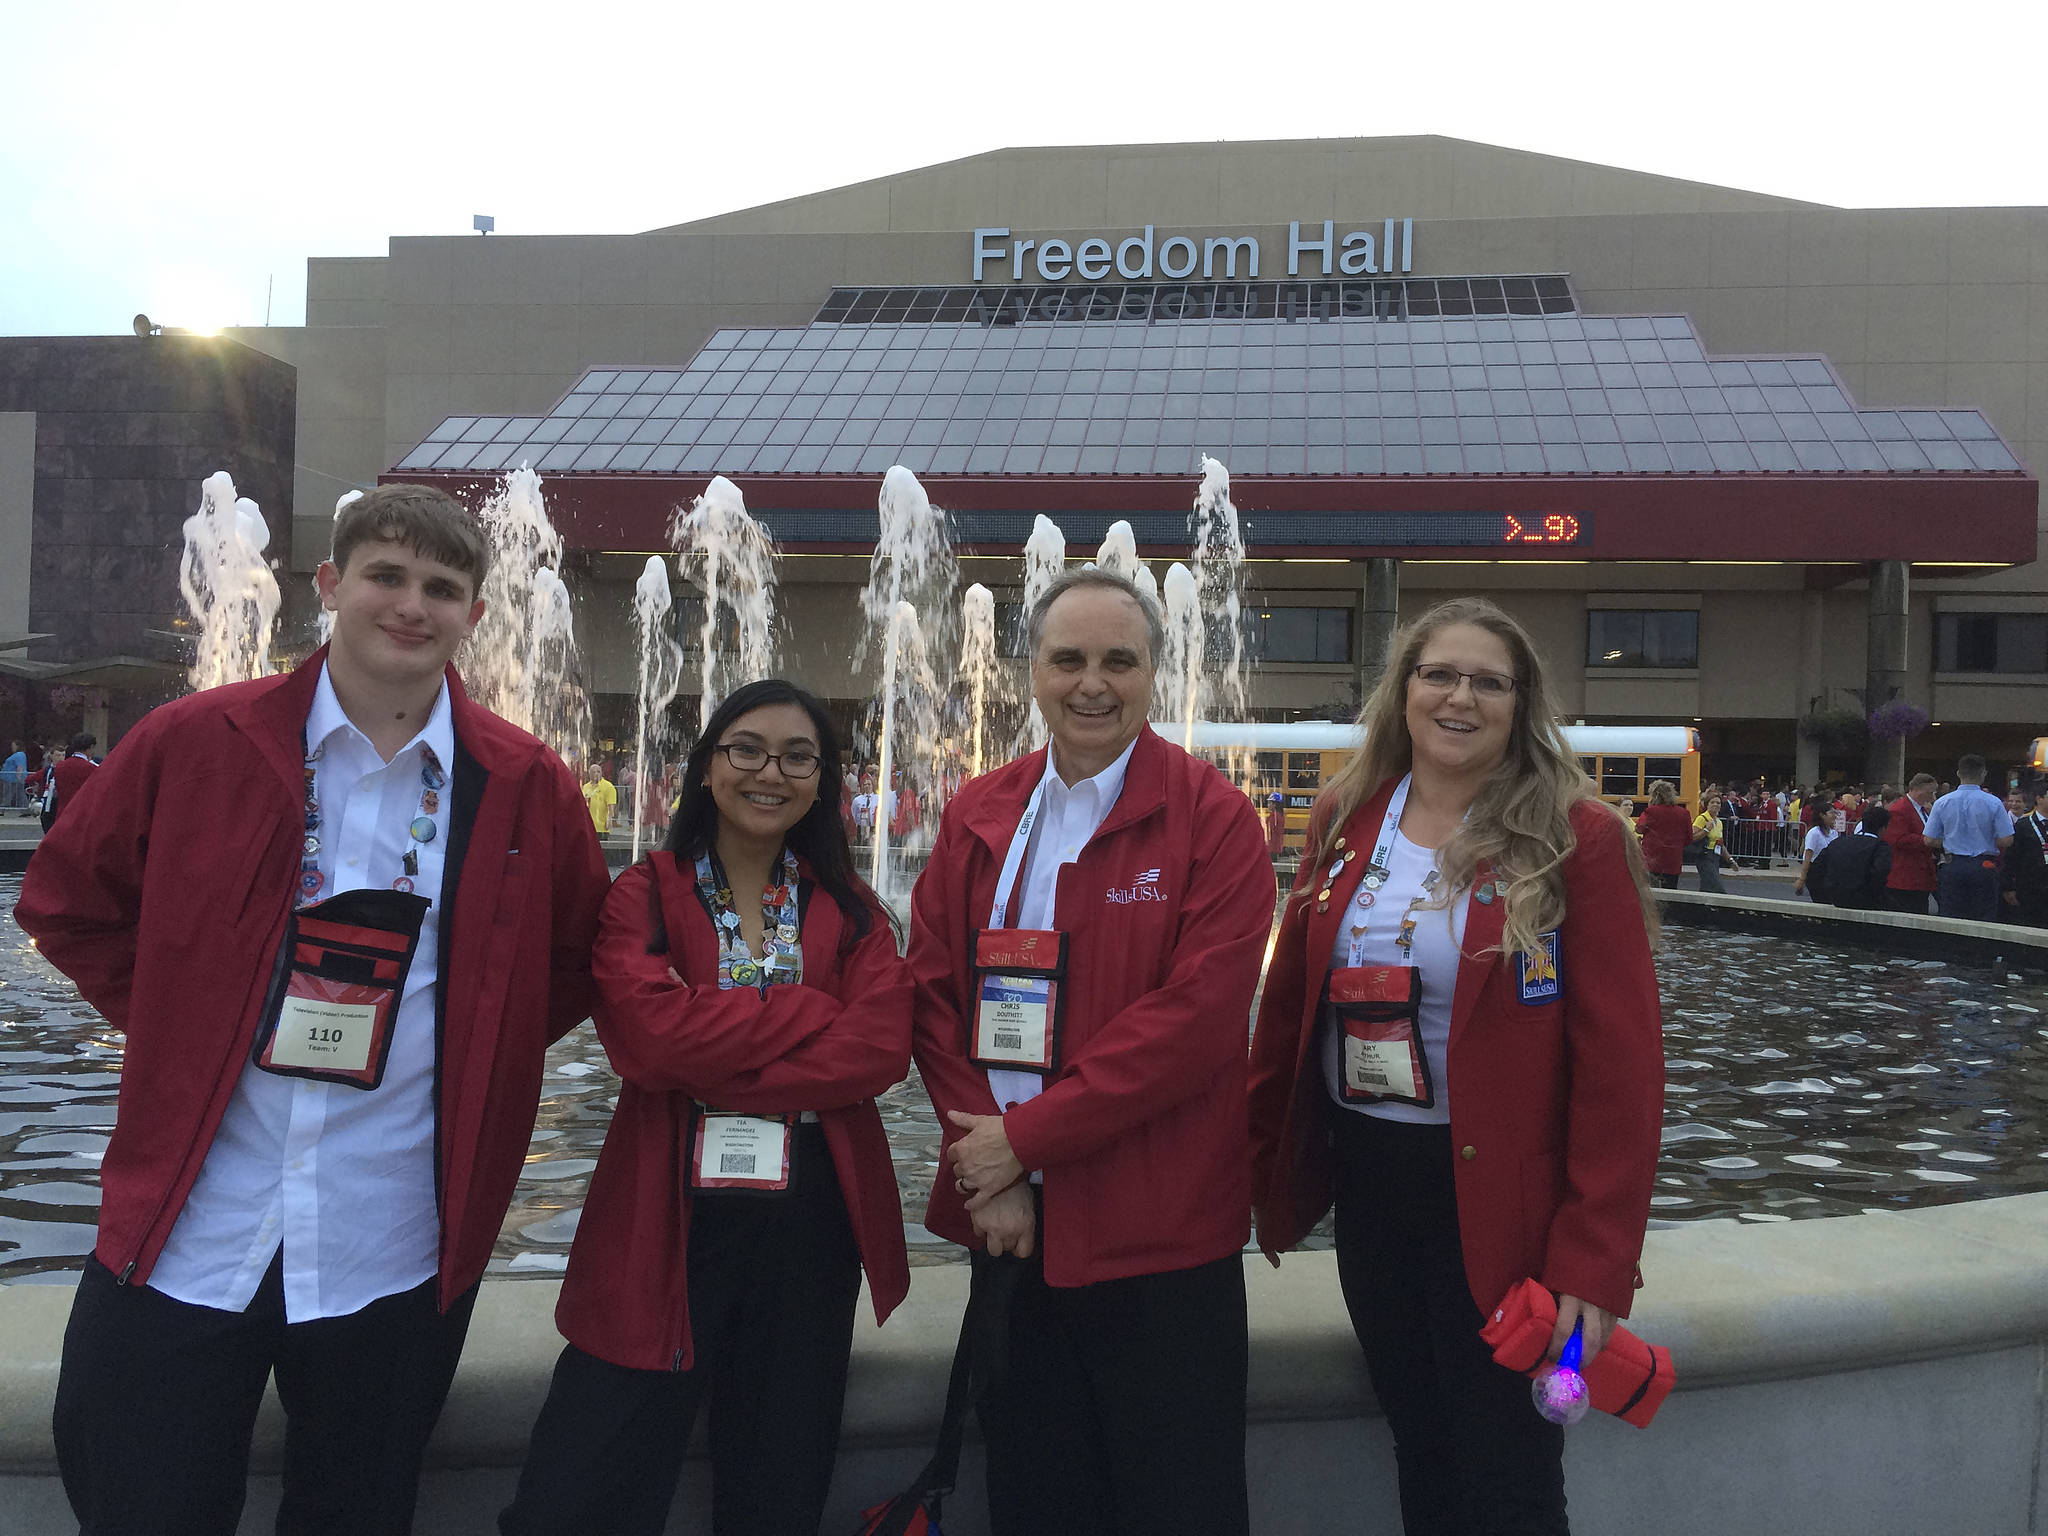 Oak Harbor High School filmmaking students Skyler George and Tia Fernandez attended the SkillsUSA national final competition in Louisville, KY along with Oak Harbor High School video teacher Chris Douthitt and culinary teacher Mary Arthur.